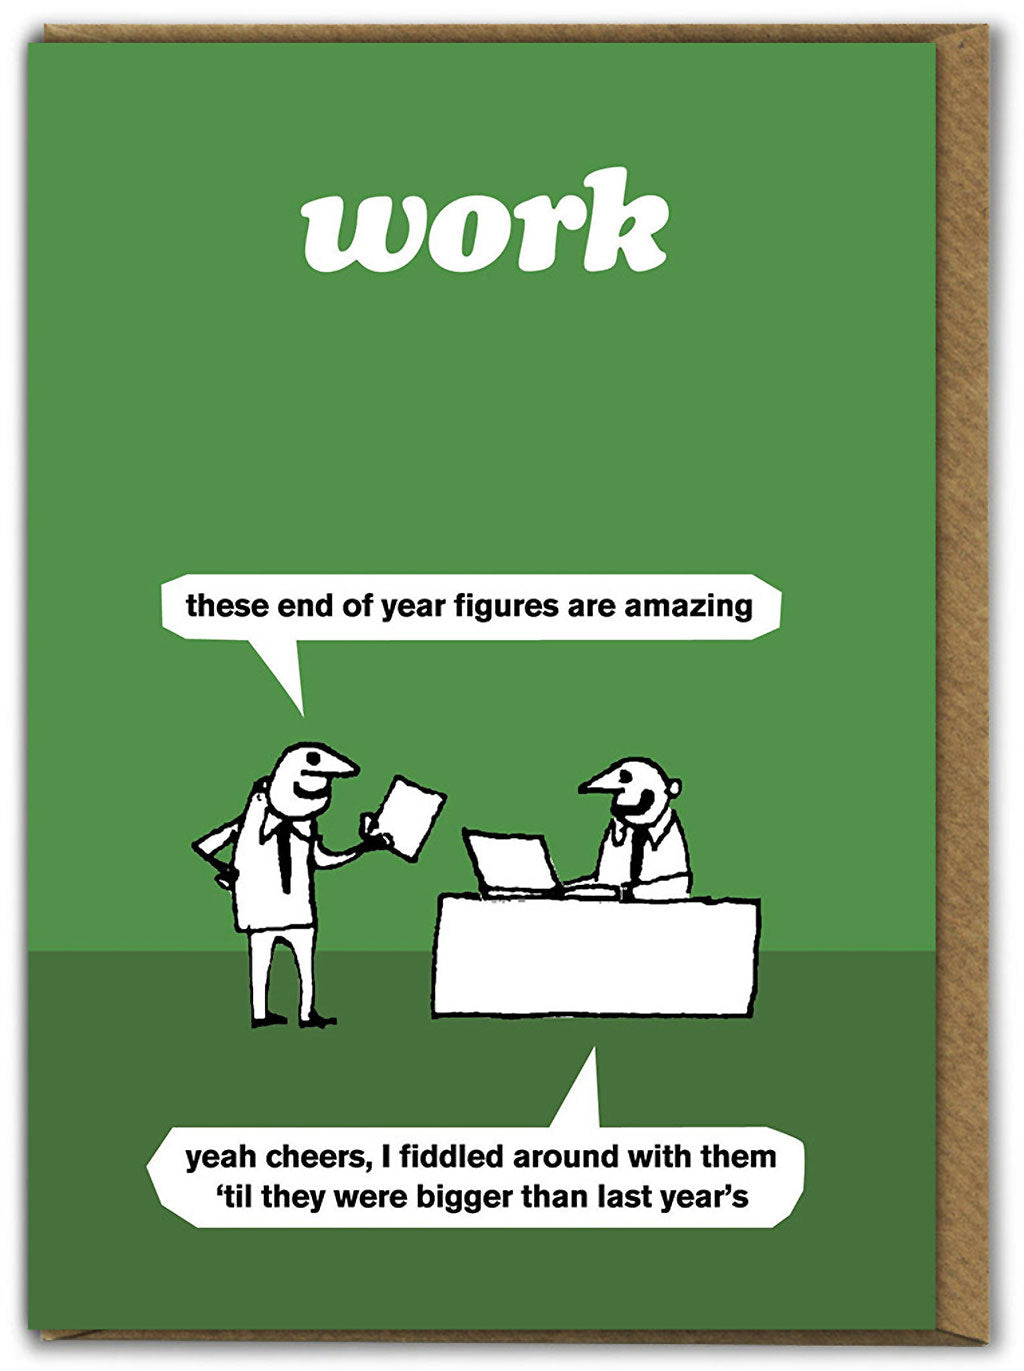 Amazing Figures Modern Toss Funny Card from Penny Black